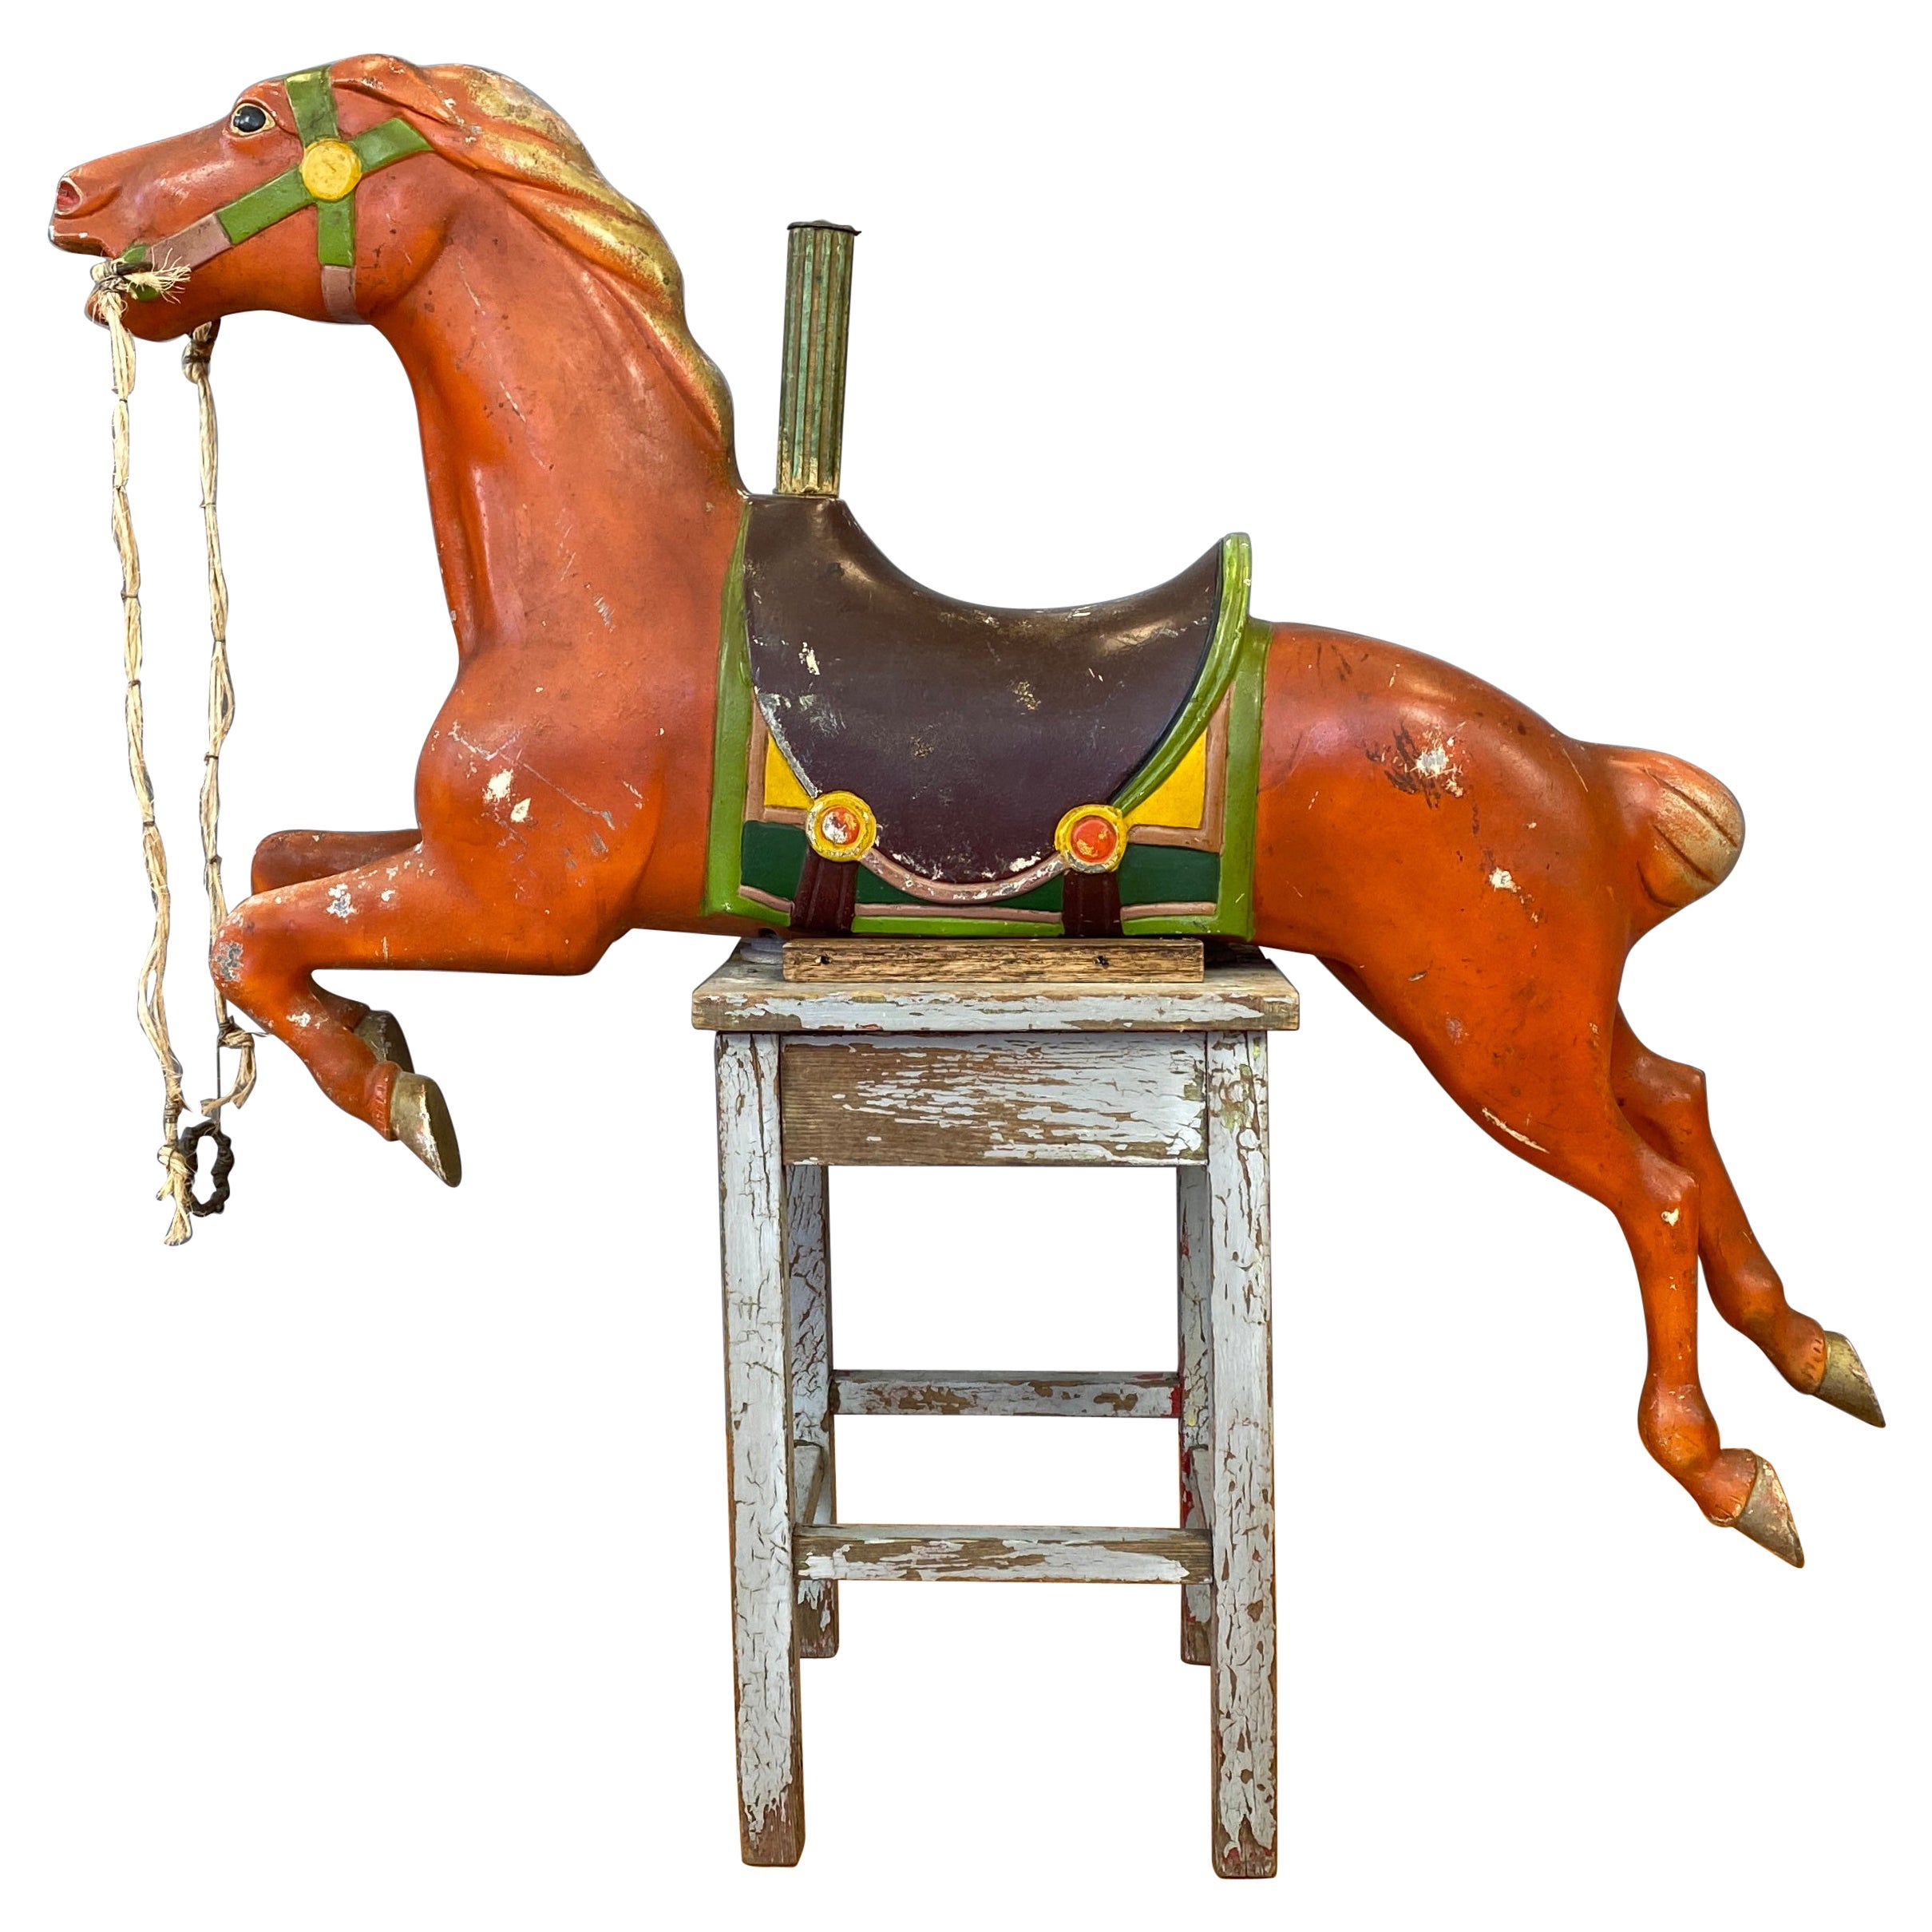 1940s Red Metal Carousel Horse w/Custom Shabby Chic Style Stand